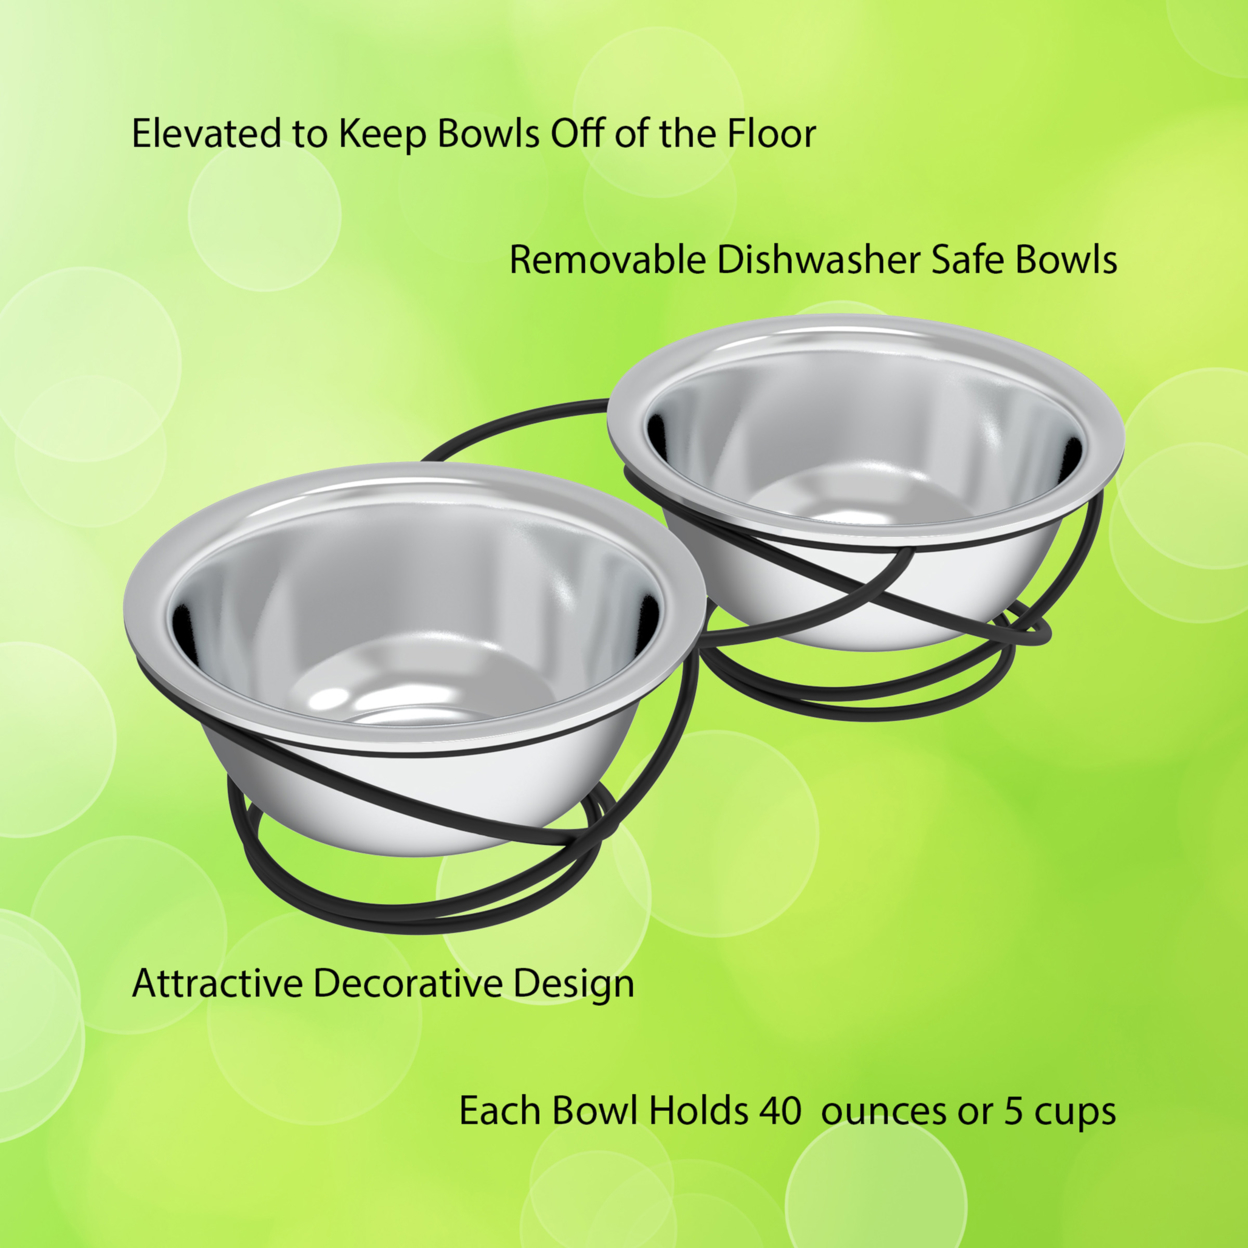 Stainless Steel Raised Food And Water Bowls With Decorative 3.5 Inch Tall Stand For Dogs And Cats-2 Bowls, 40 Oz